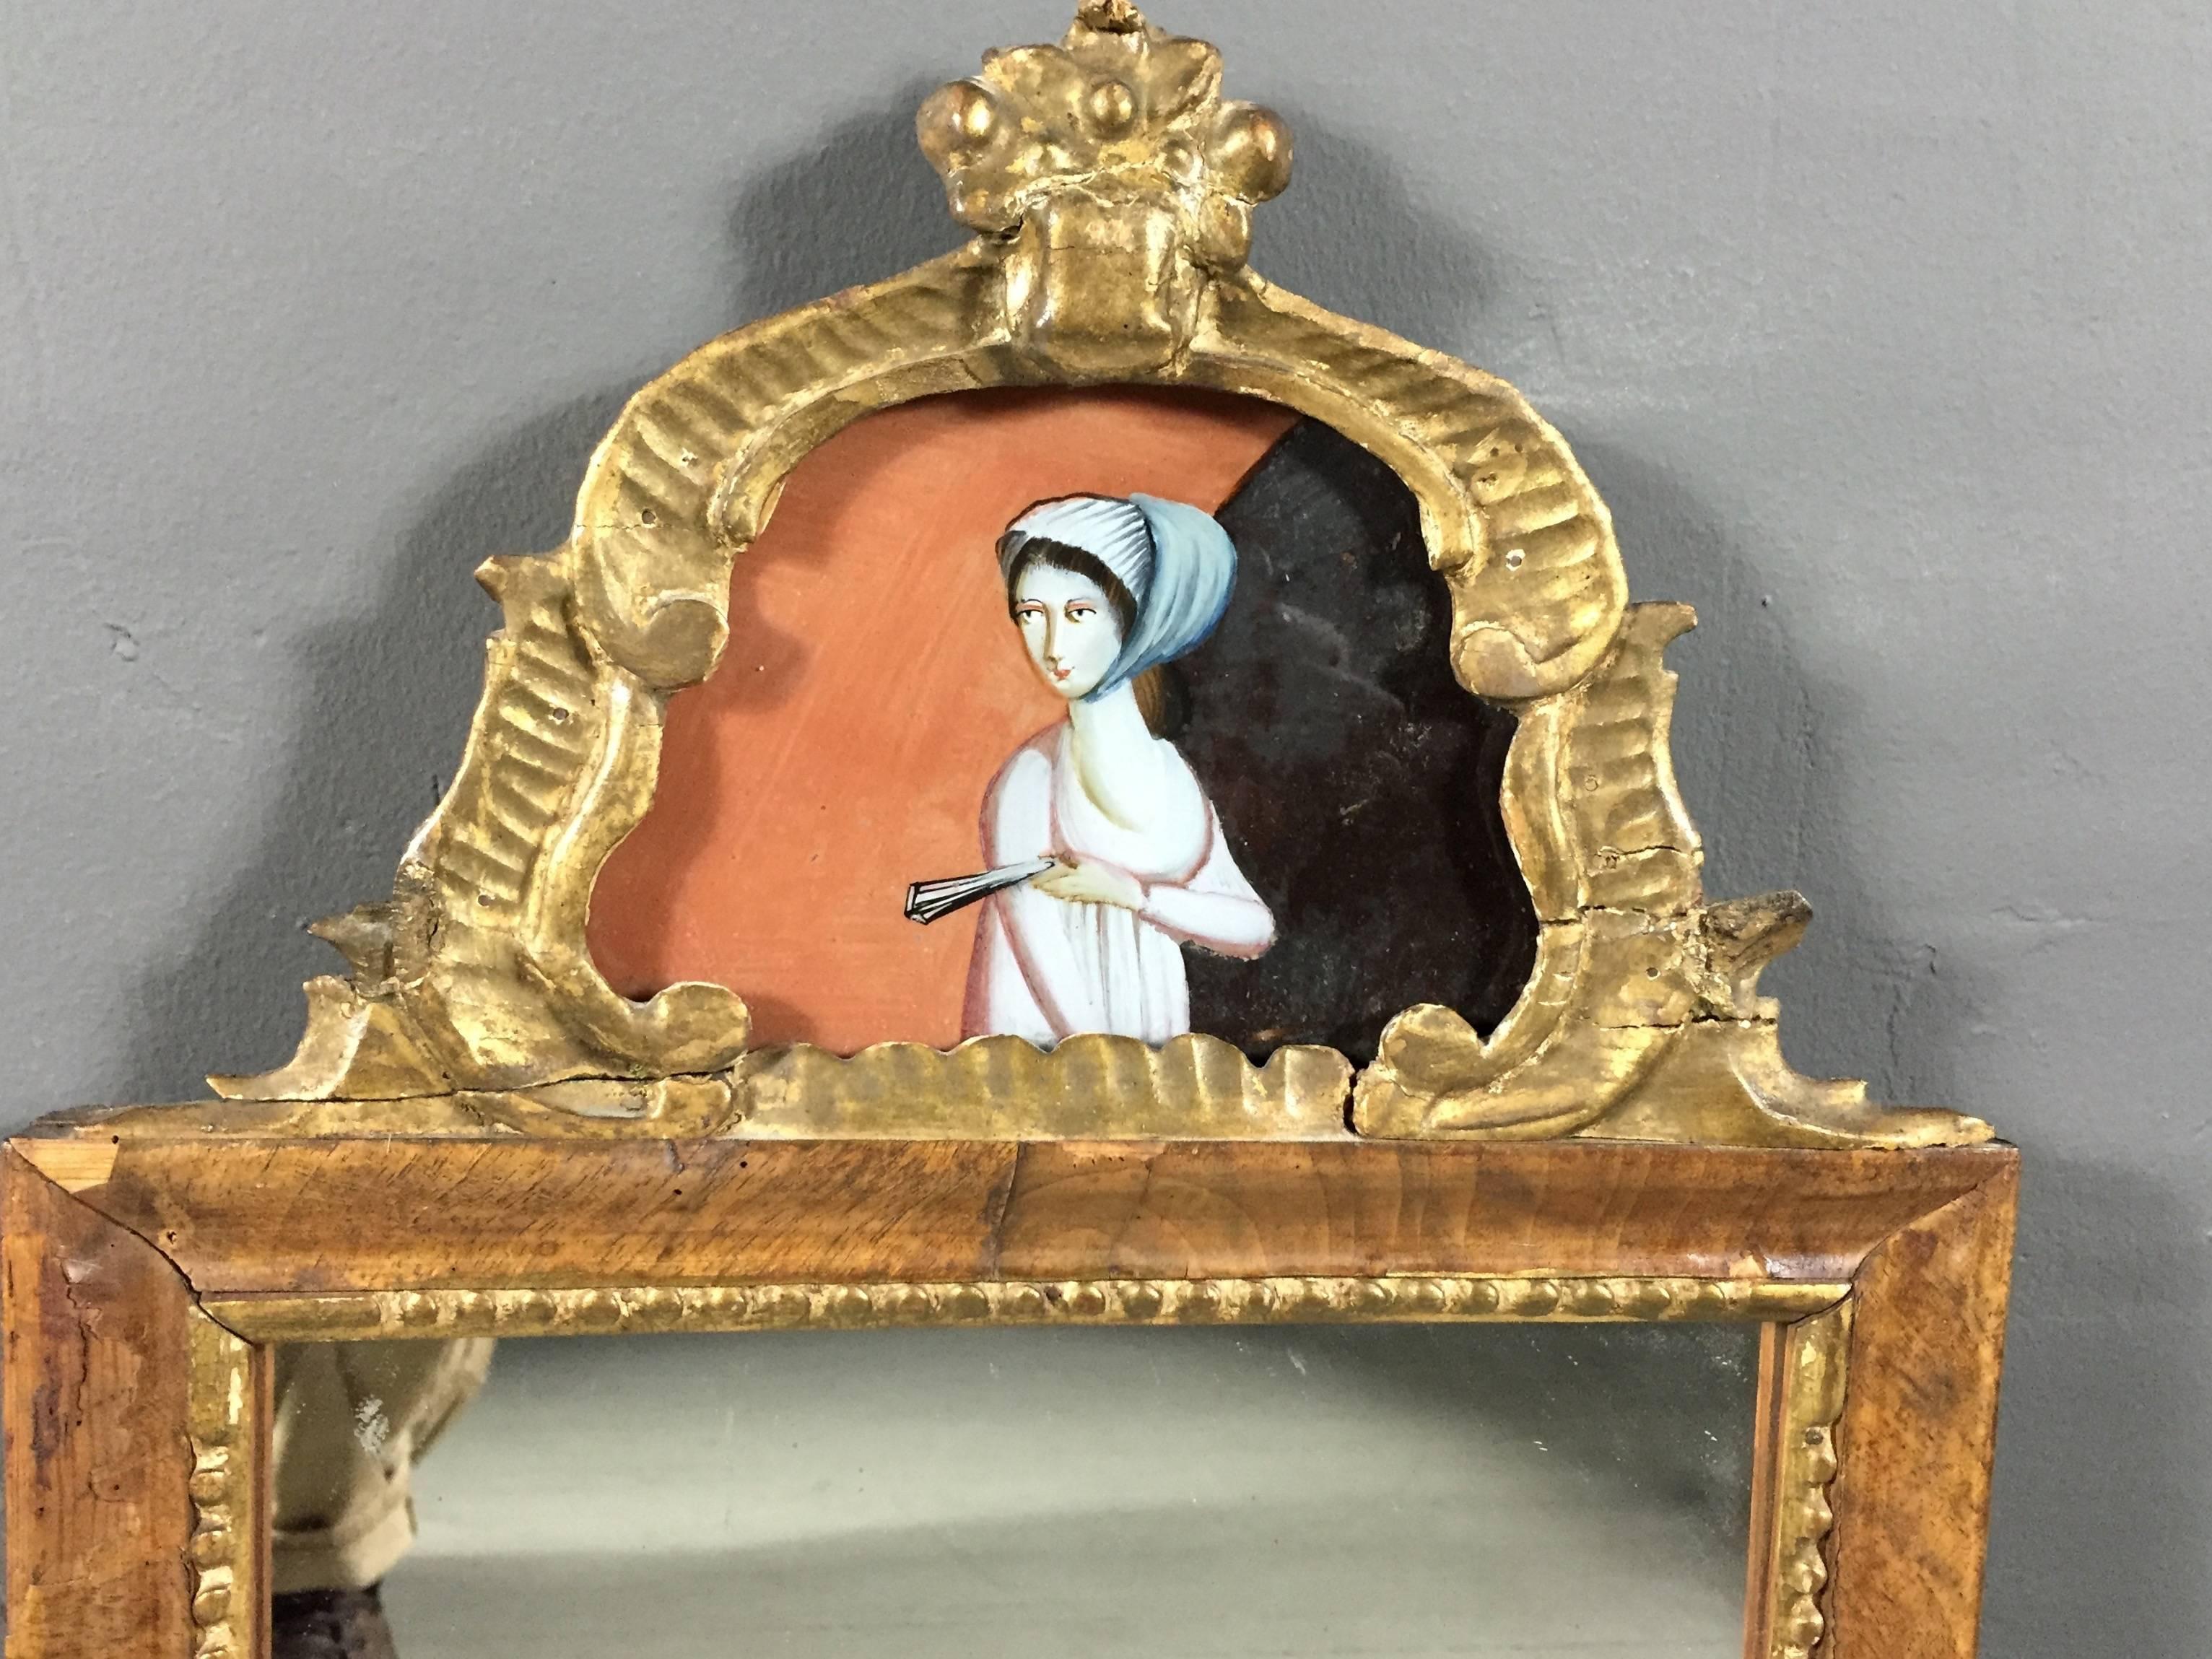 A very wonderful and unusual late 18th century walnut veneer mirror trimmed in gilt beading, with a later added Rococo style pediment that includes a beautiful reverse glass painted portrait, top-most portion of a flower basket is papier-mâché.